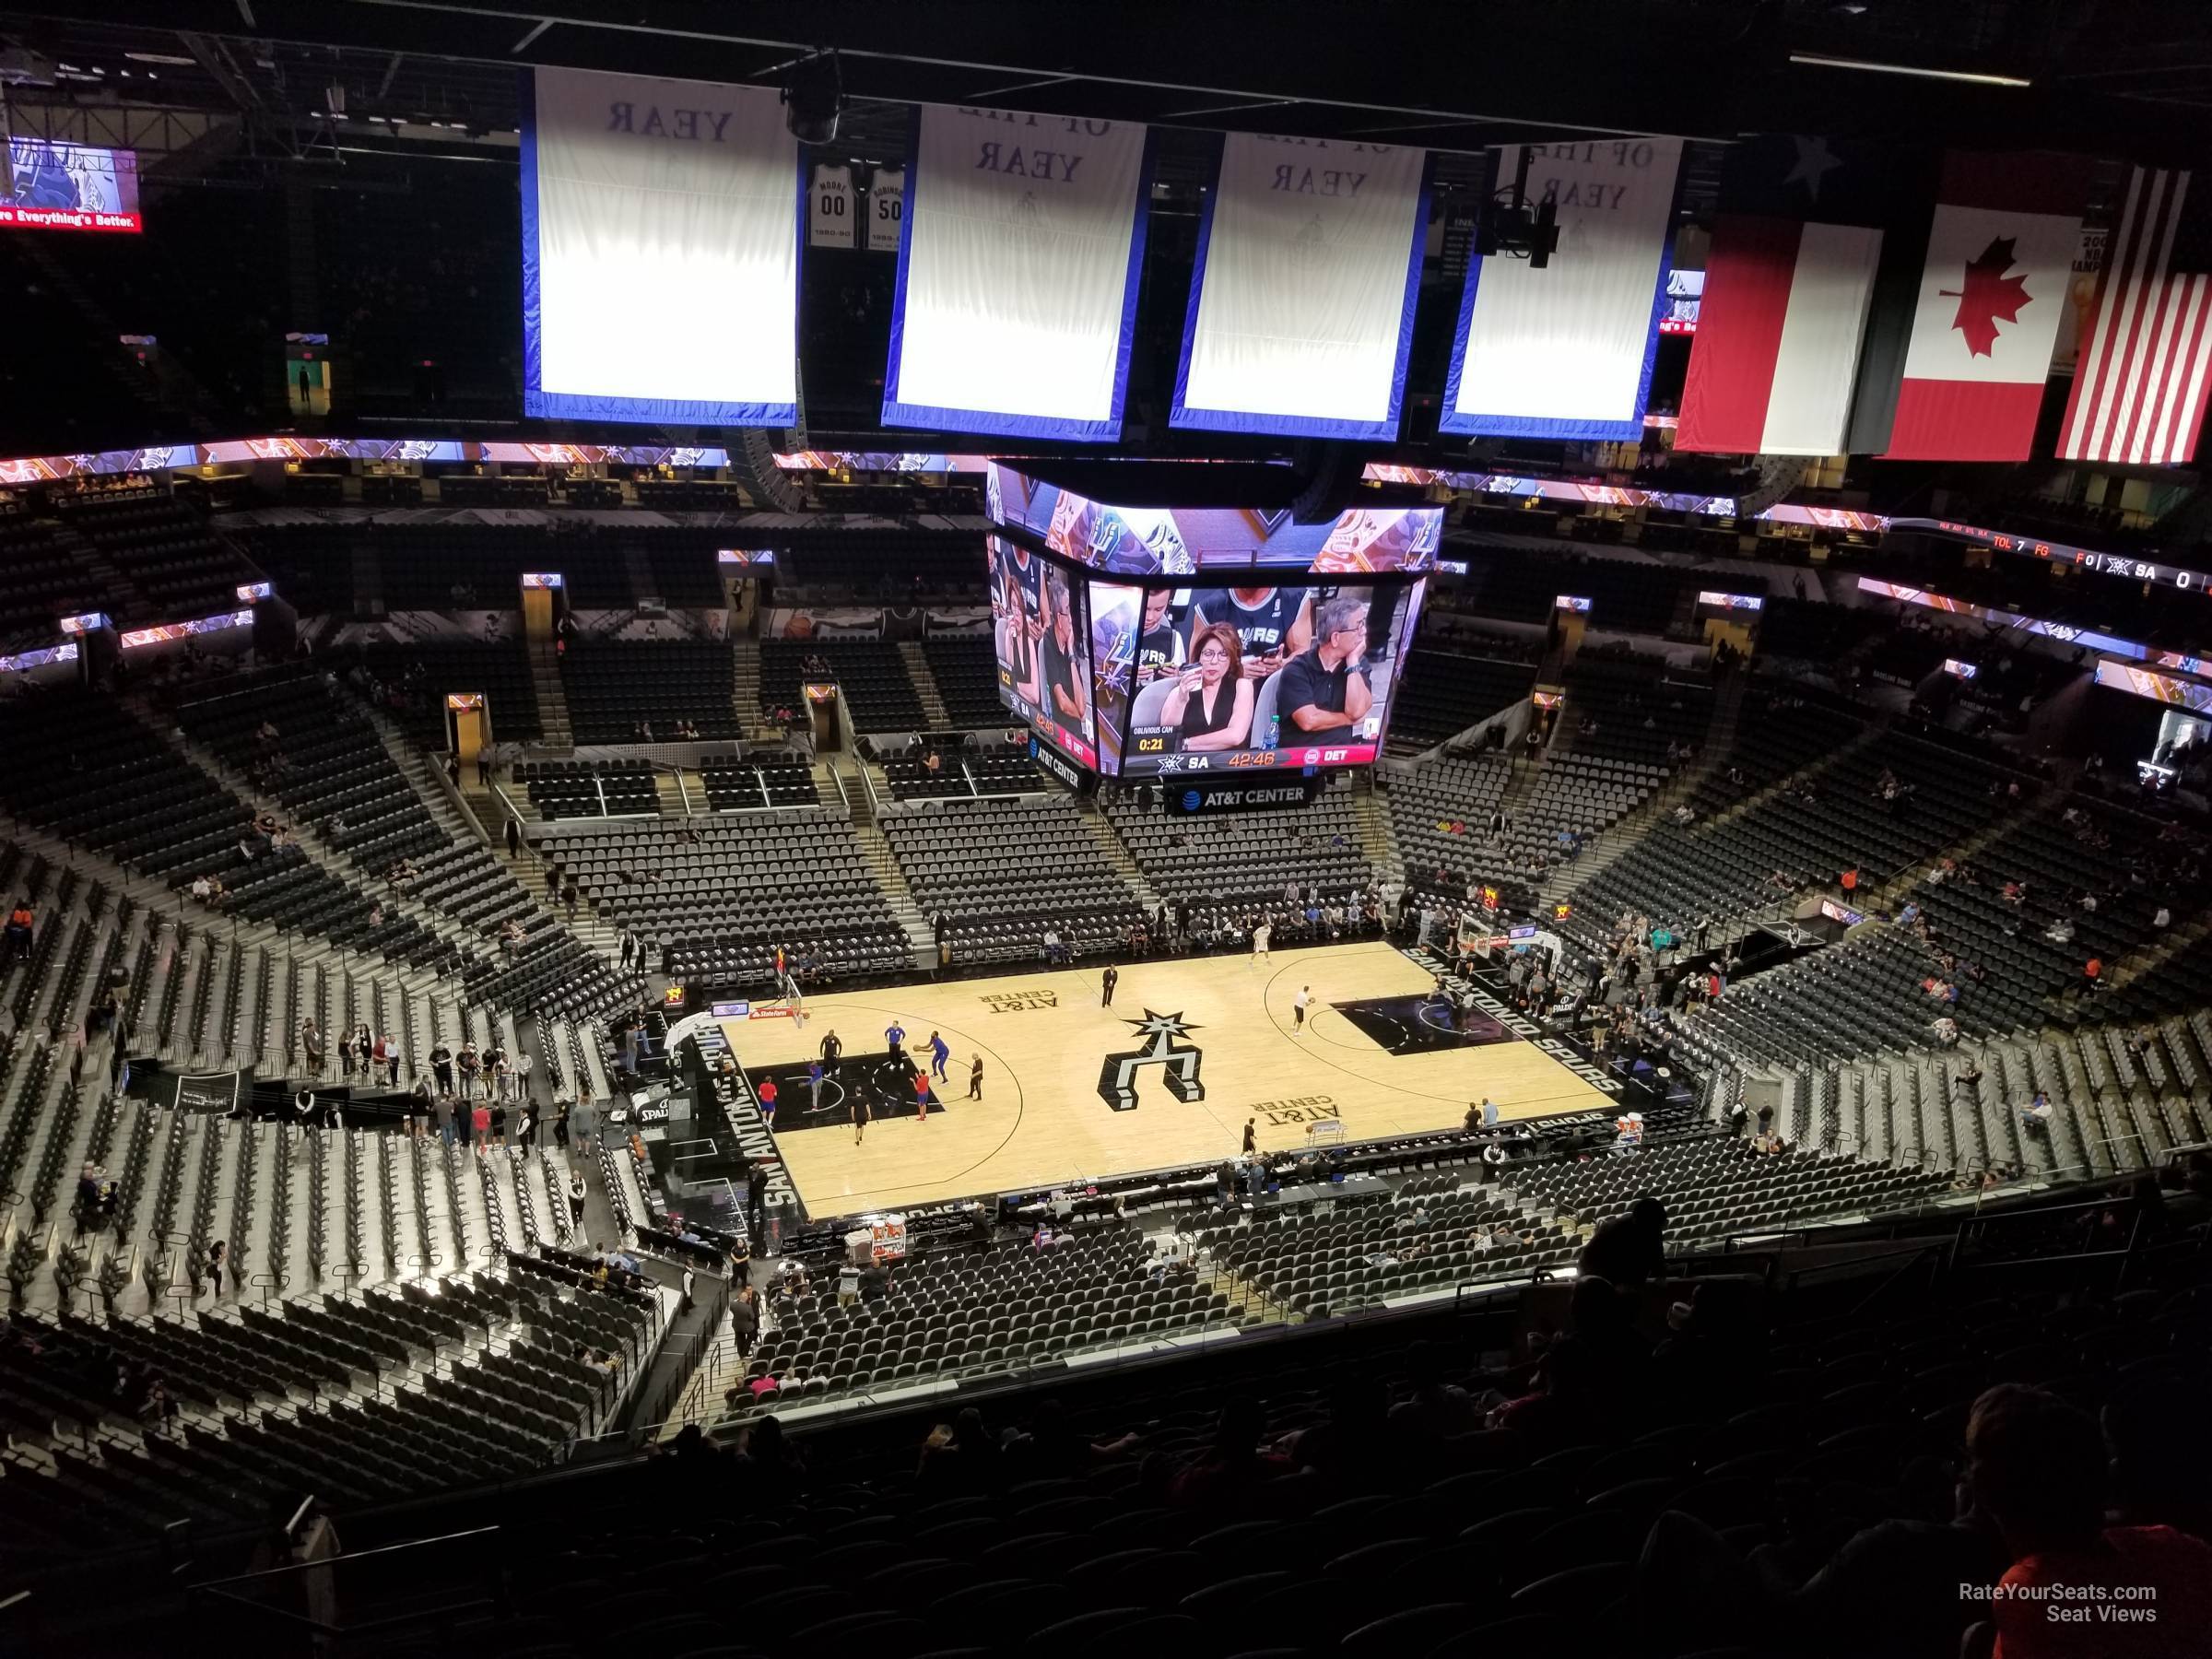 section 210, row 16 seat view  for basketball - at&t center